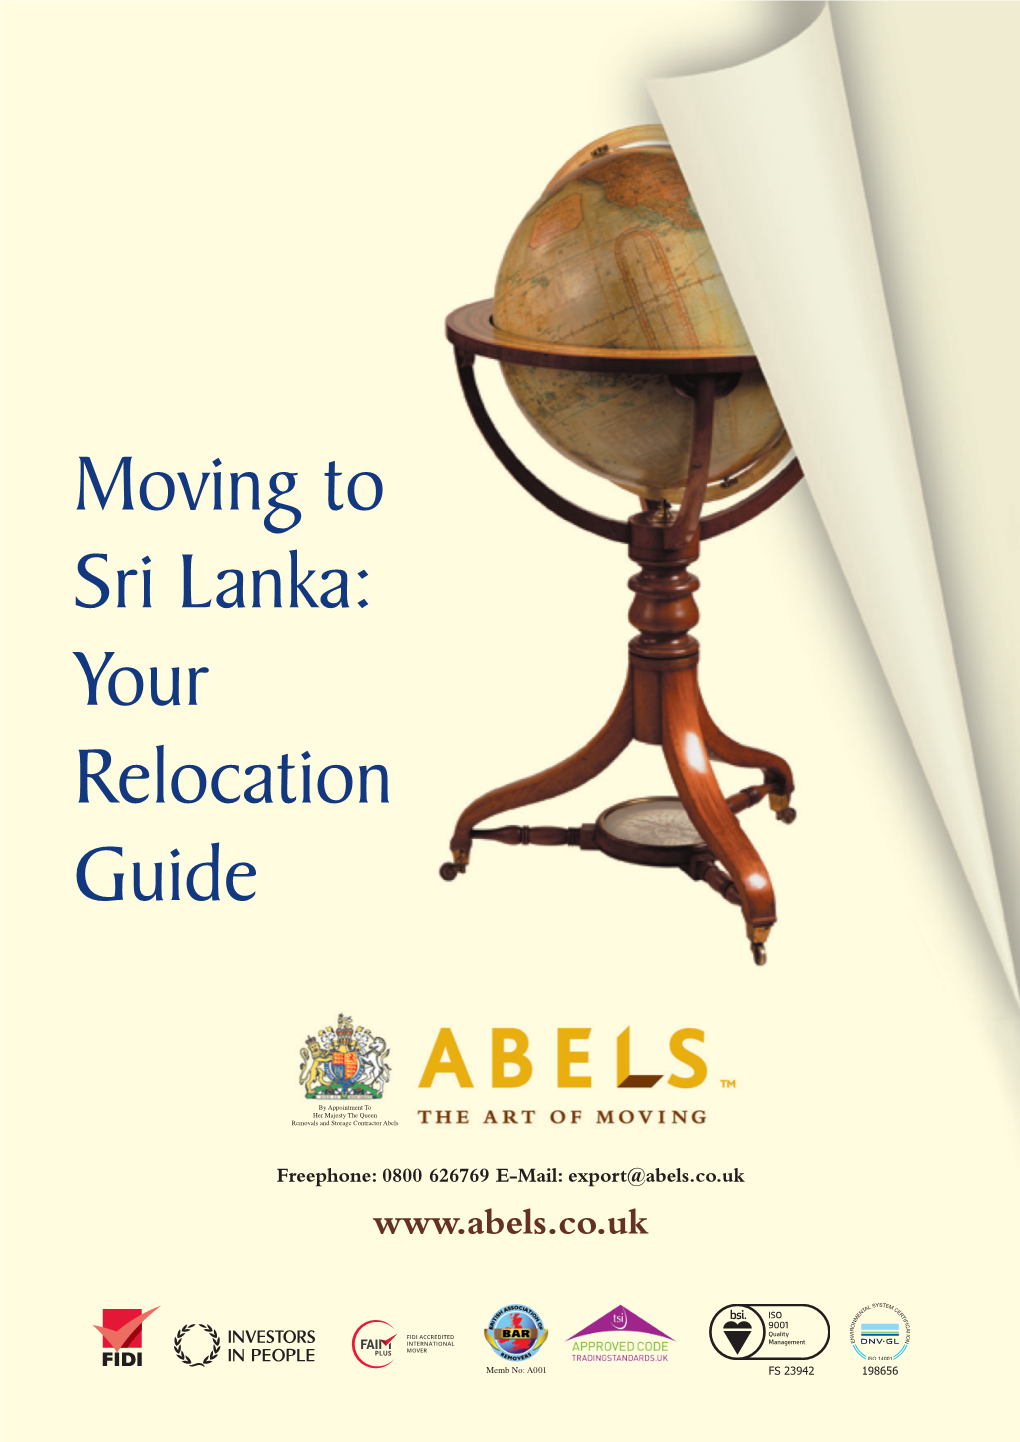 Moving to Sri Lanka: Your Relocation Guide